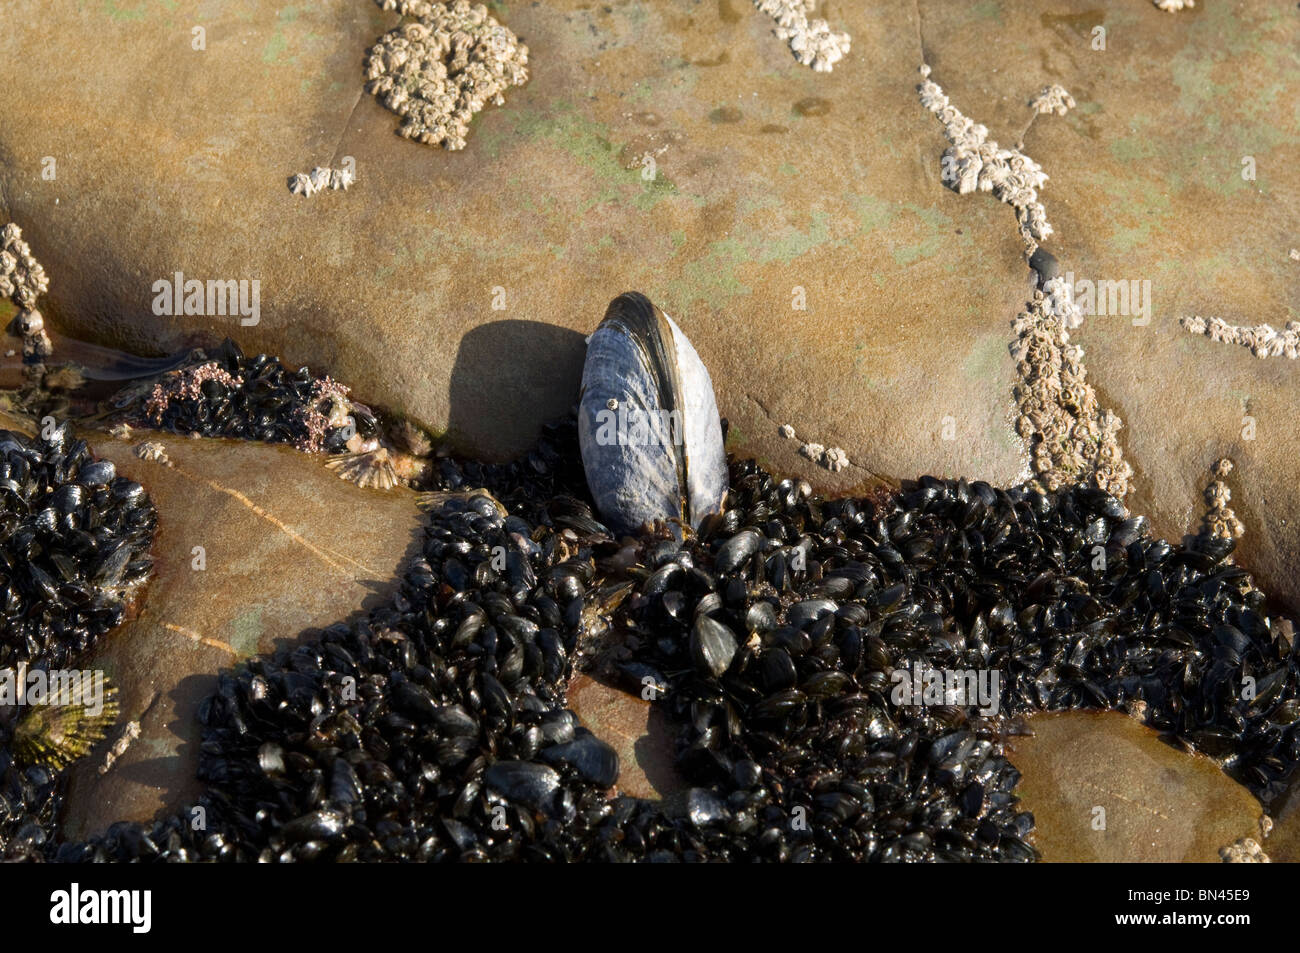 Large mussel surrounded by one year old musssel spat, Mytilus edulis, intertidal, Broad Haven, Pembrokeshire, Wales, UK, Europe Stock Photo